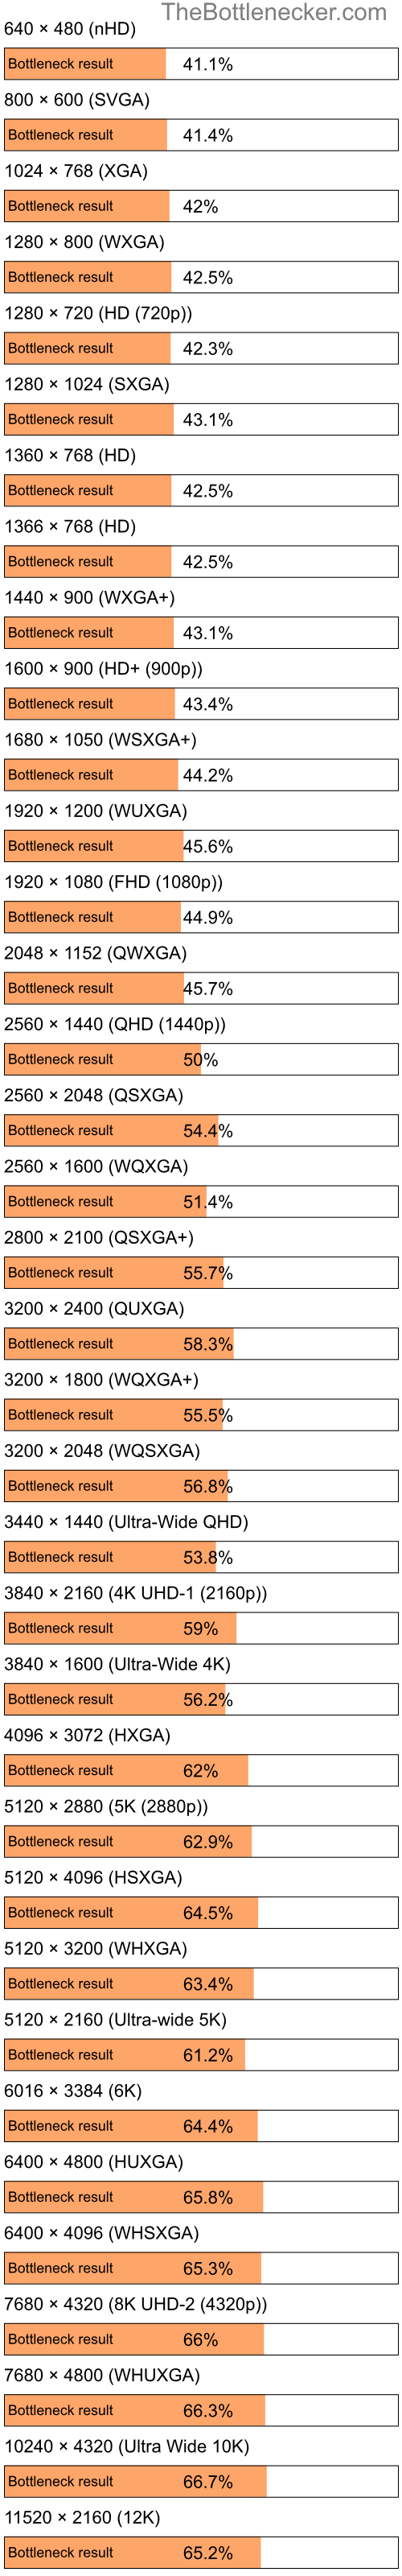 Bottleneck results by resolution for Intel Core i7-14700K and NVIDIA GeForce GTX 1650 in Graphic Card Intense Tasks